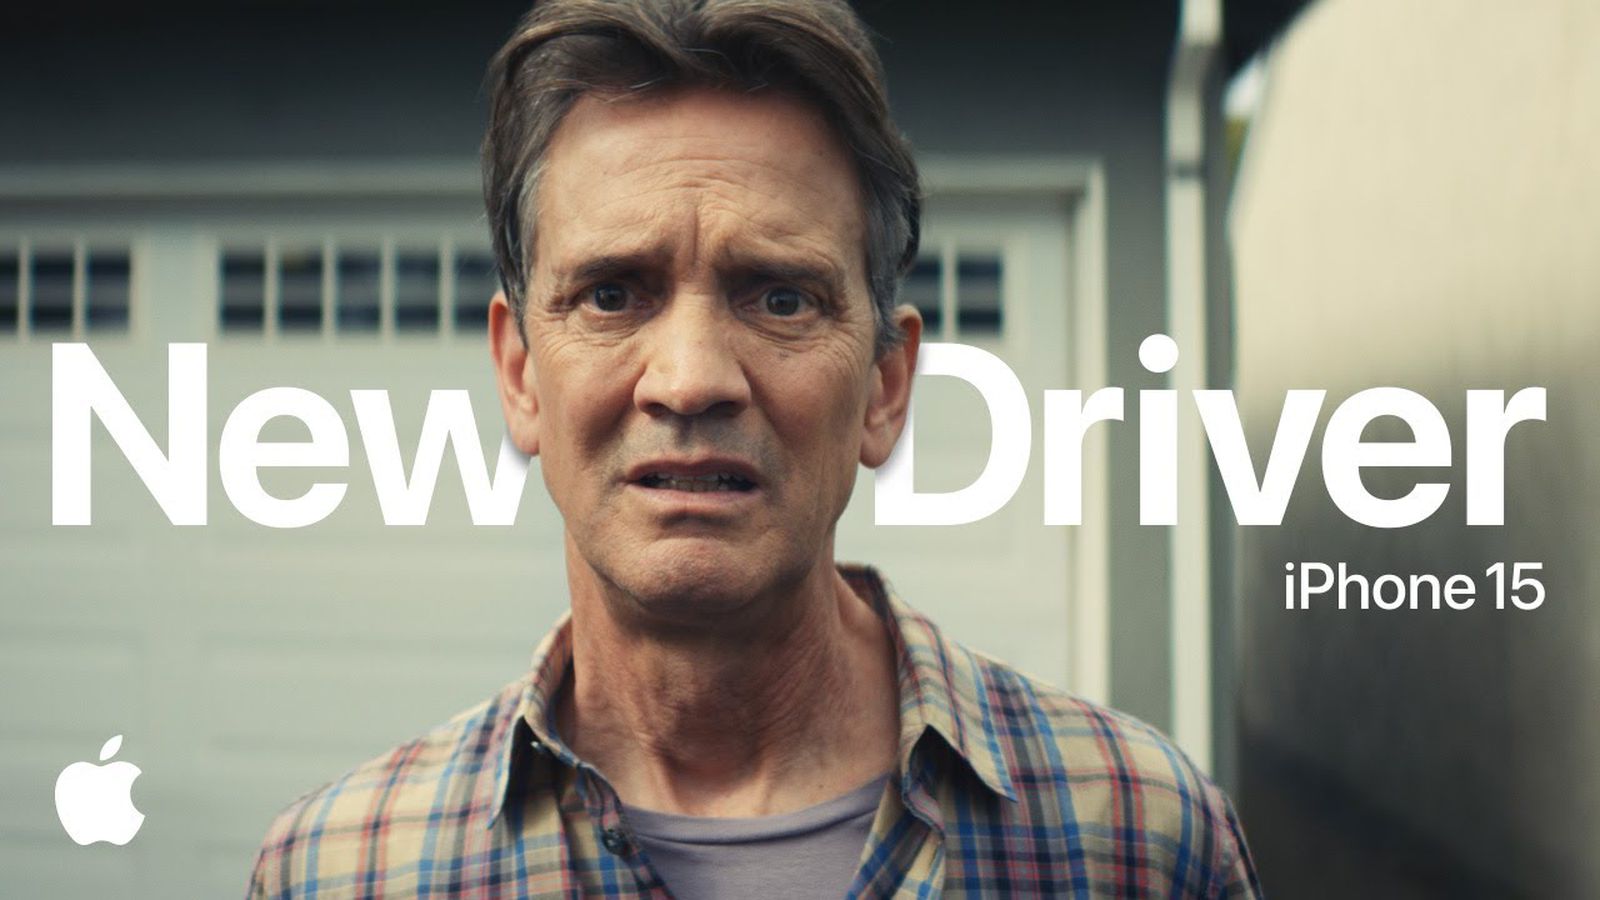 iPhone 15 ‘New Driver’ ad highlights automatic check-in